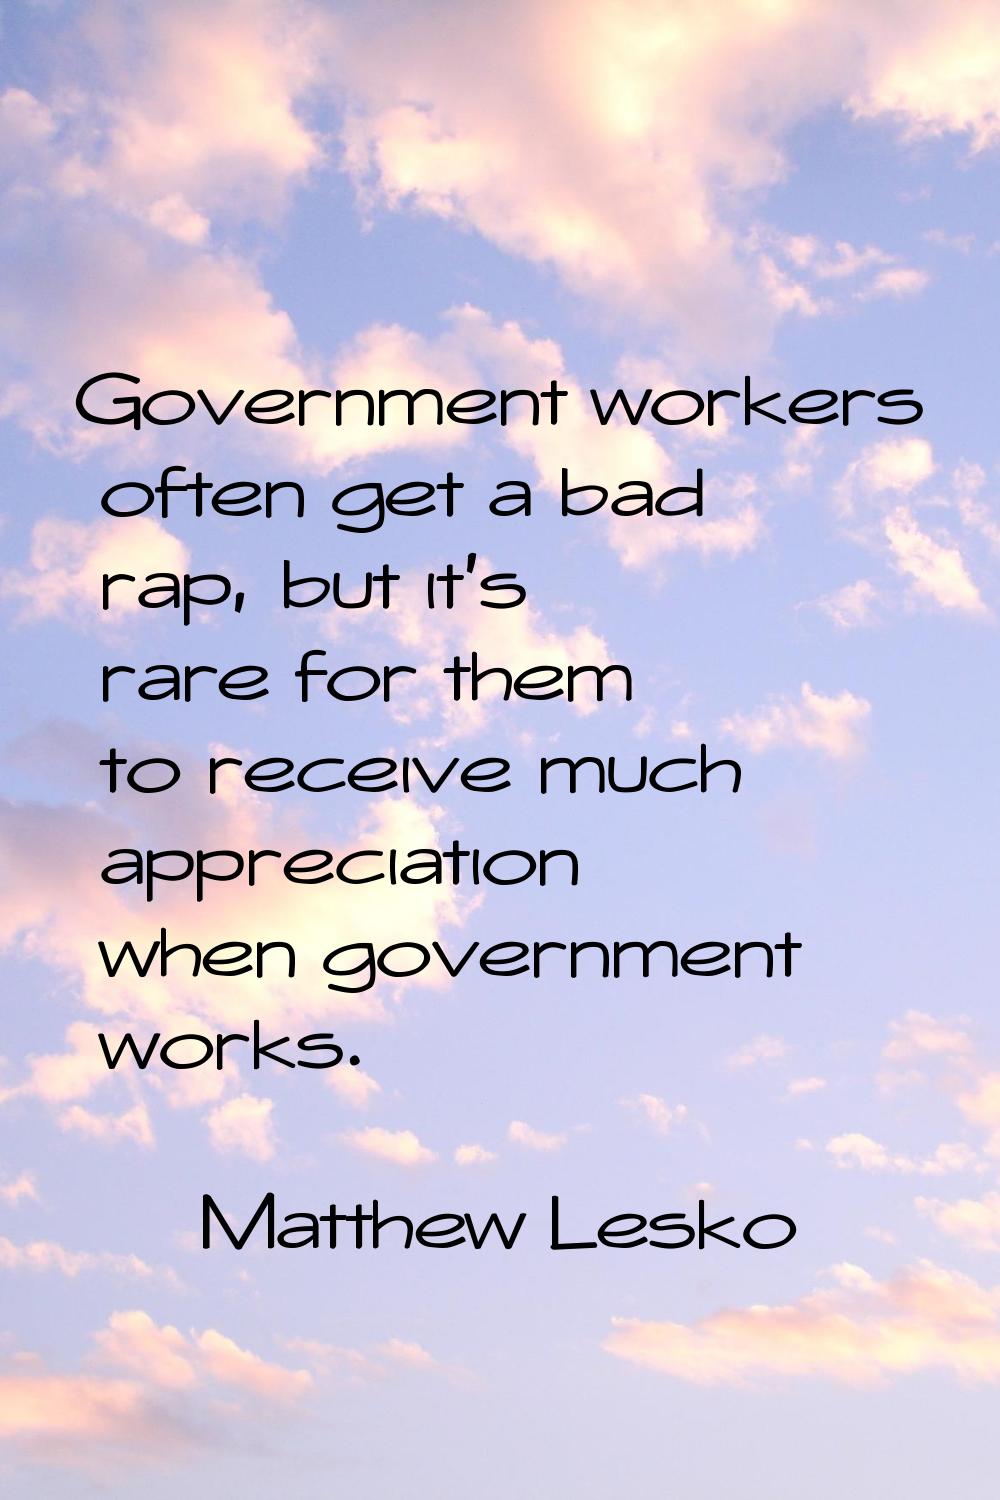 Government workers often get a bad rap, but it's rare for them to receive much appreciation when go